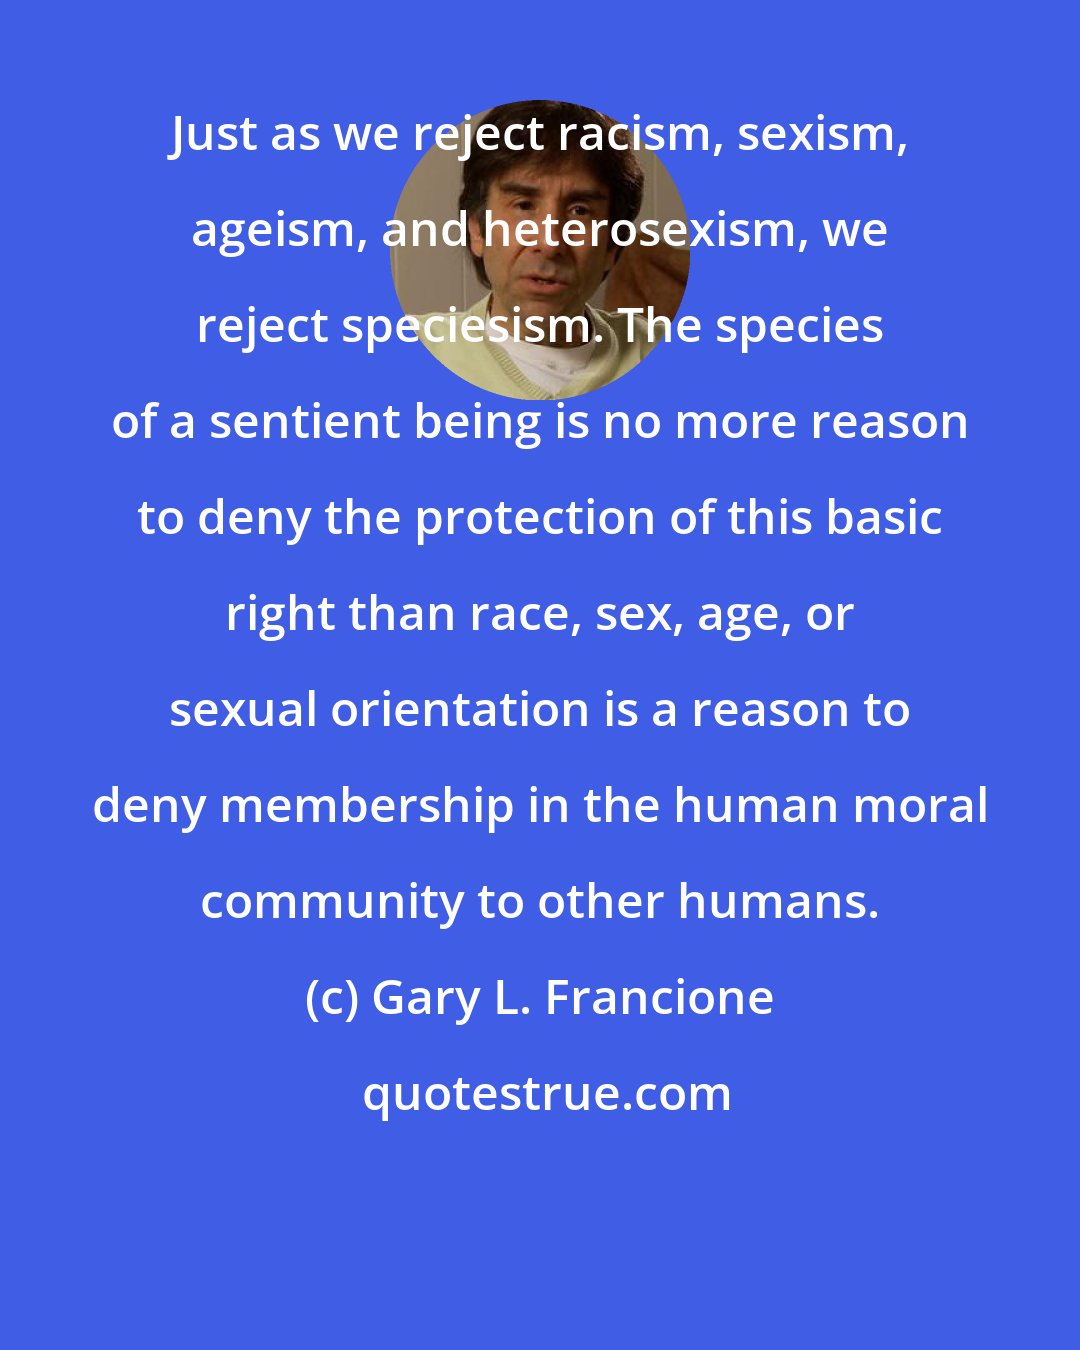 Gary L. Francione: Just as we reject racism, sexism, ageism, and heterosexism, we reject speciesism. The species of a sentient being is no more reason to deny the protection of this basic right than race, sex, age, or sexual orientation is a reason to deny membership in the human moral community to other humans.